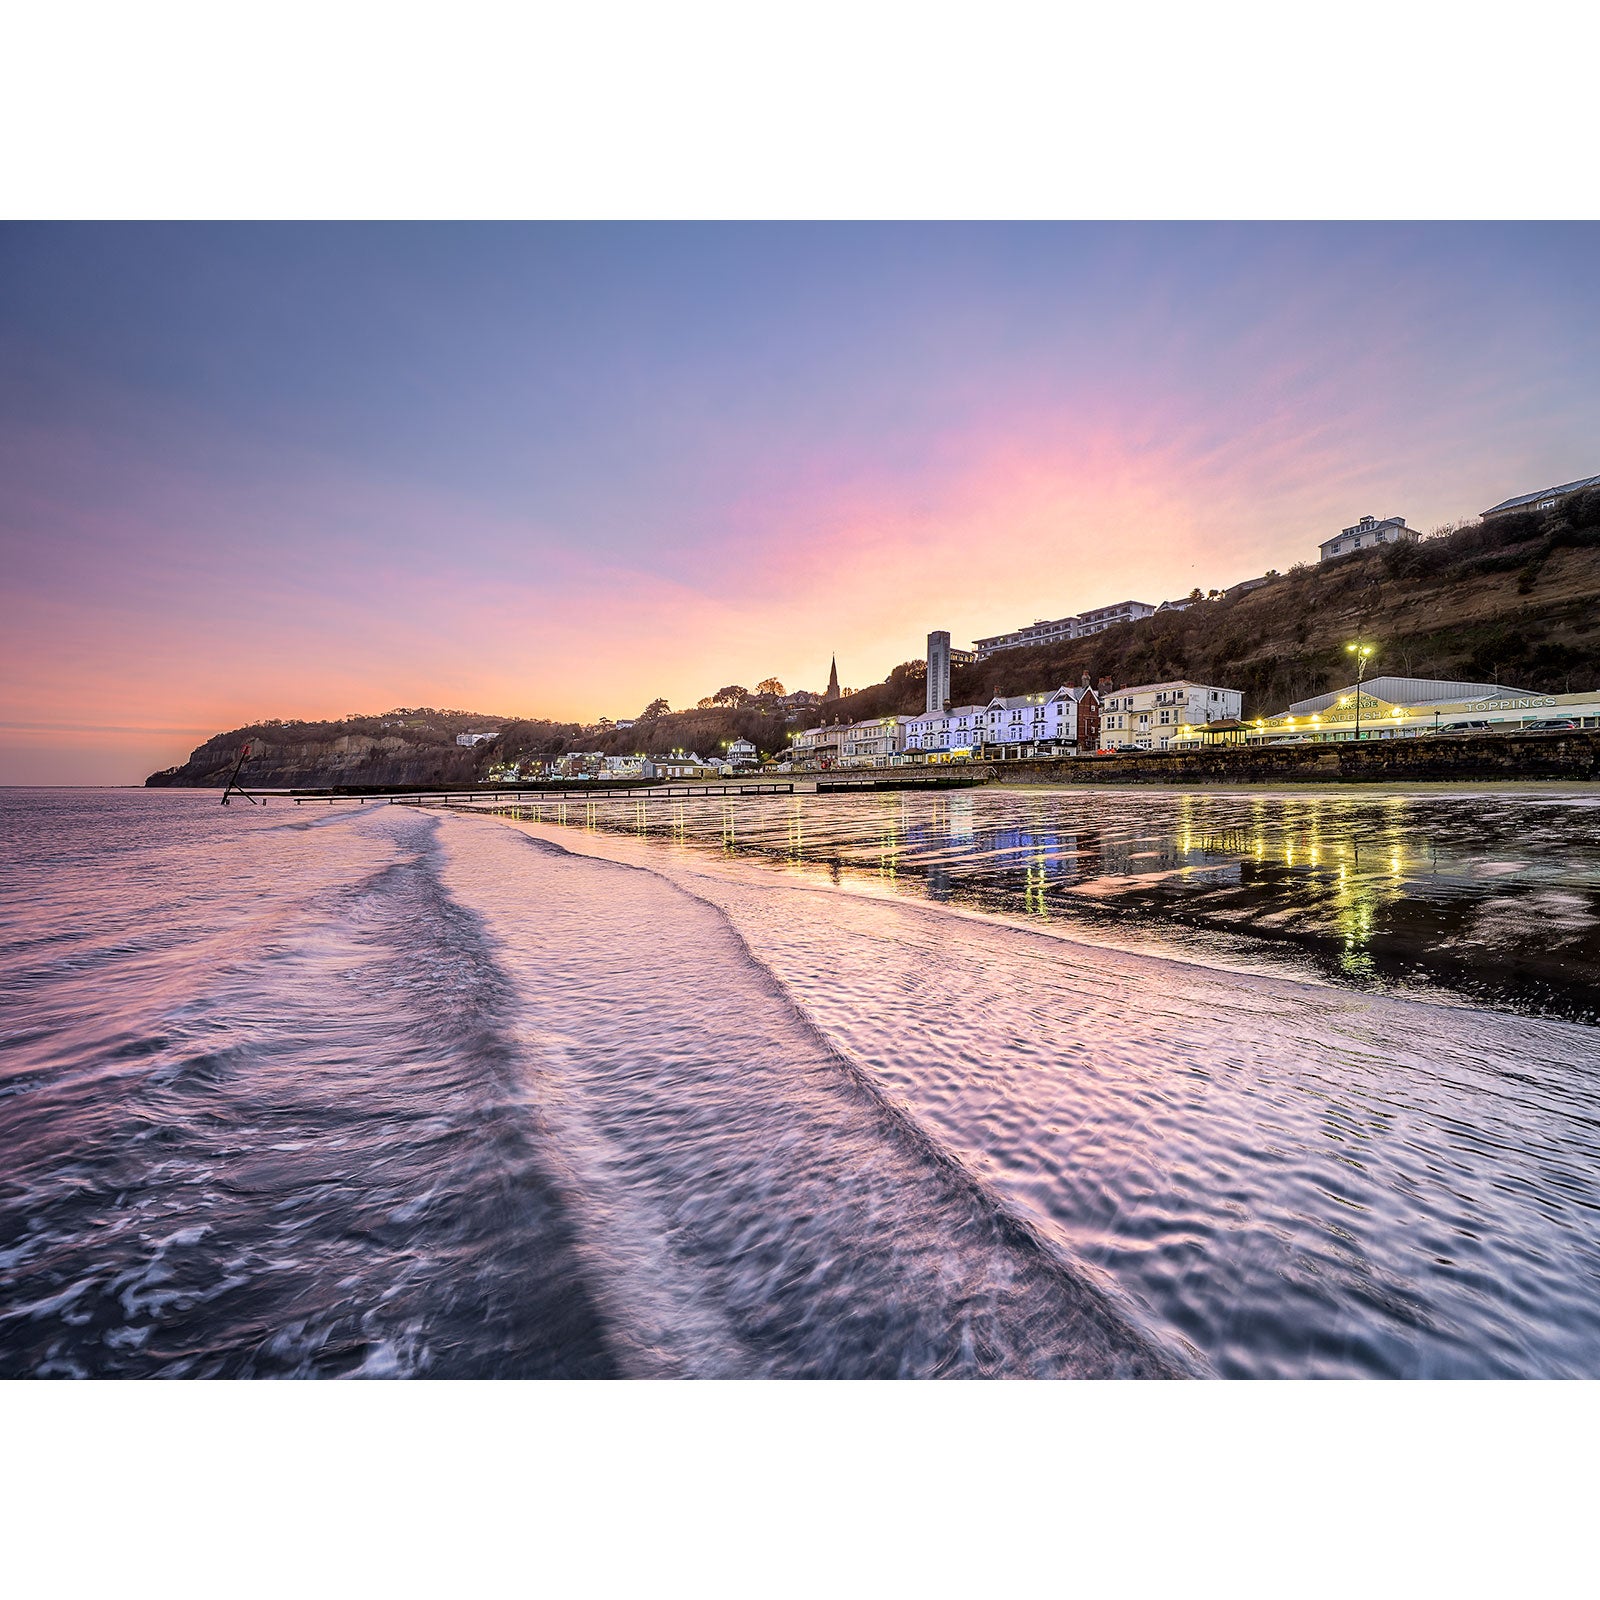 Coastal town at dusk with lit buildings reflecting on wet sand under a pastel-colored sky on Shanklin Beach by Available Light Photography.